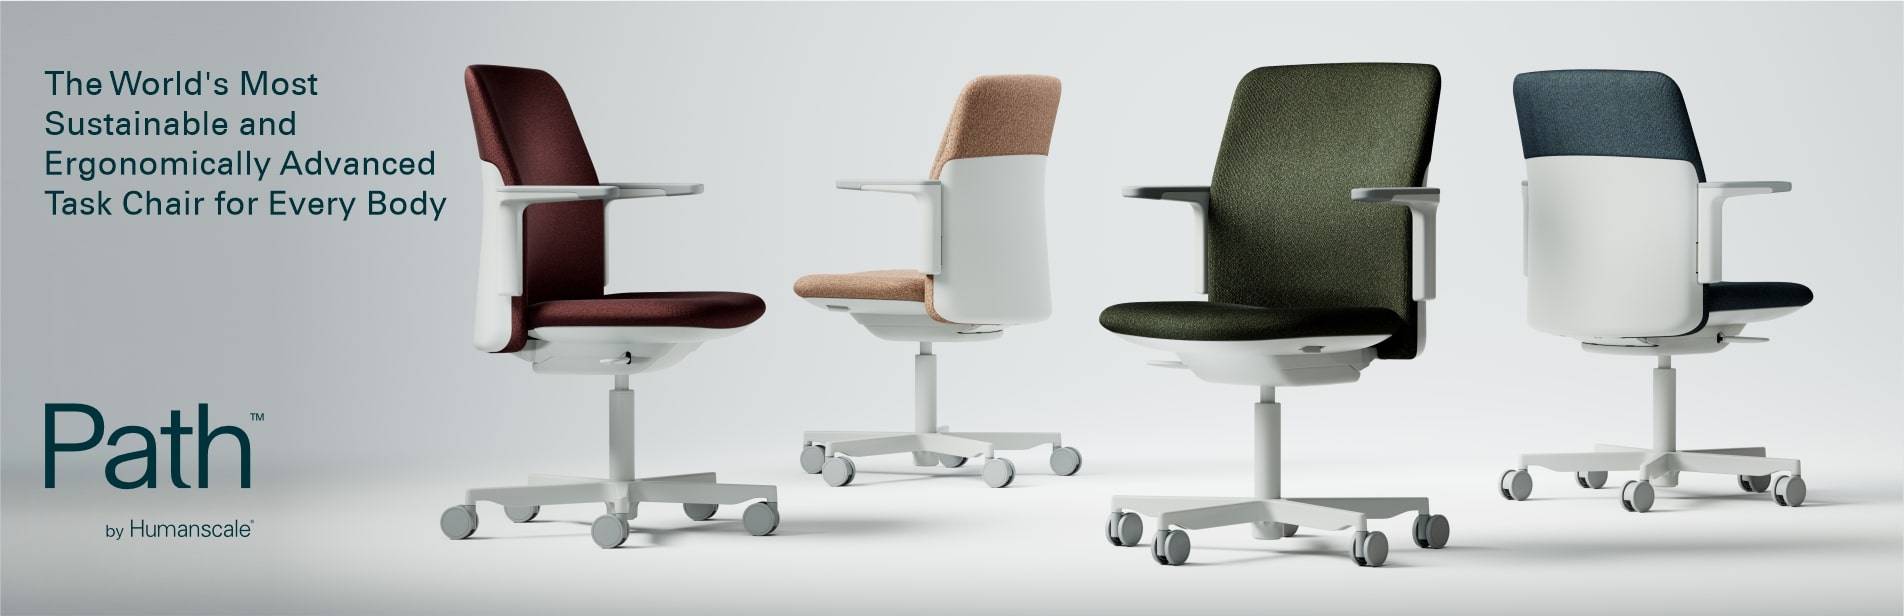 Humanscale Path Chair Laptop Banner 1